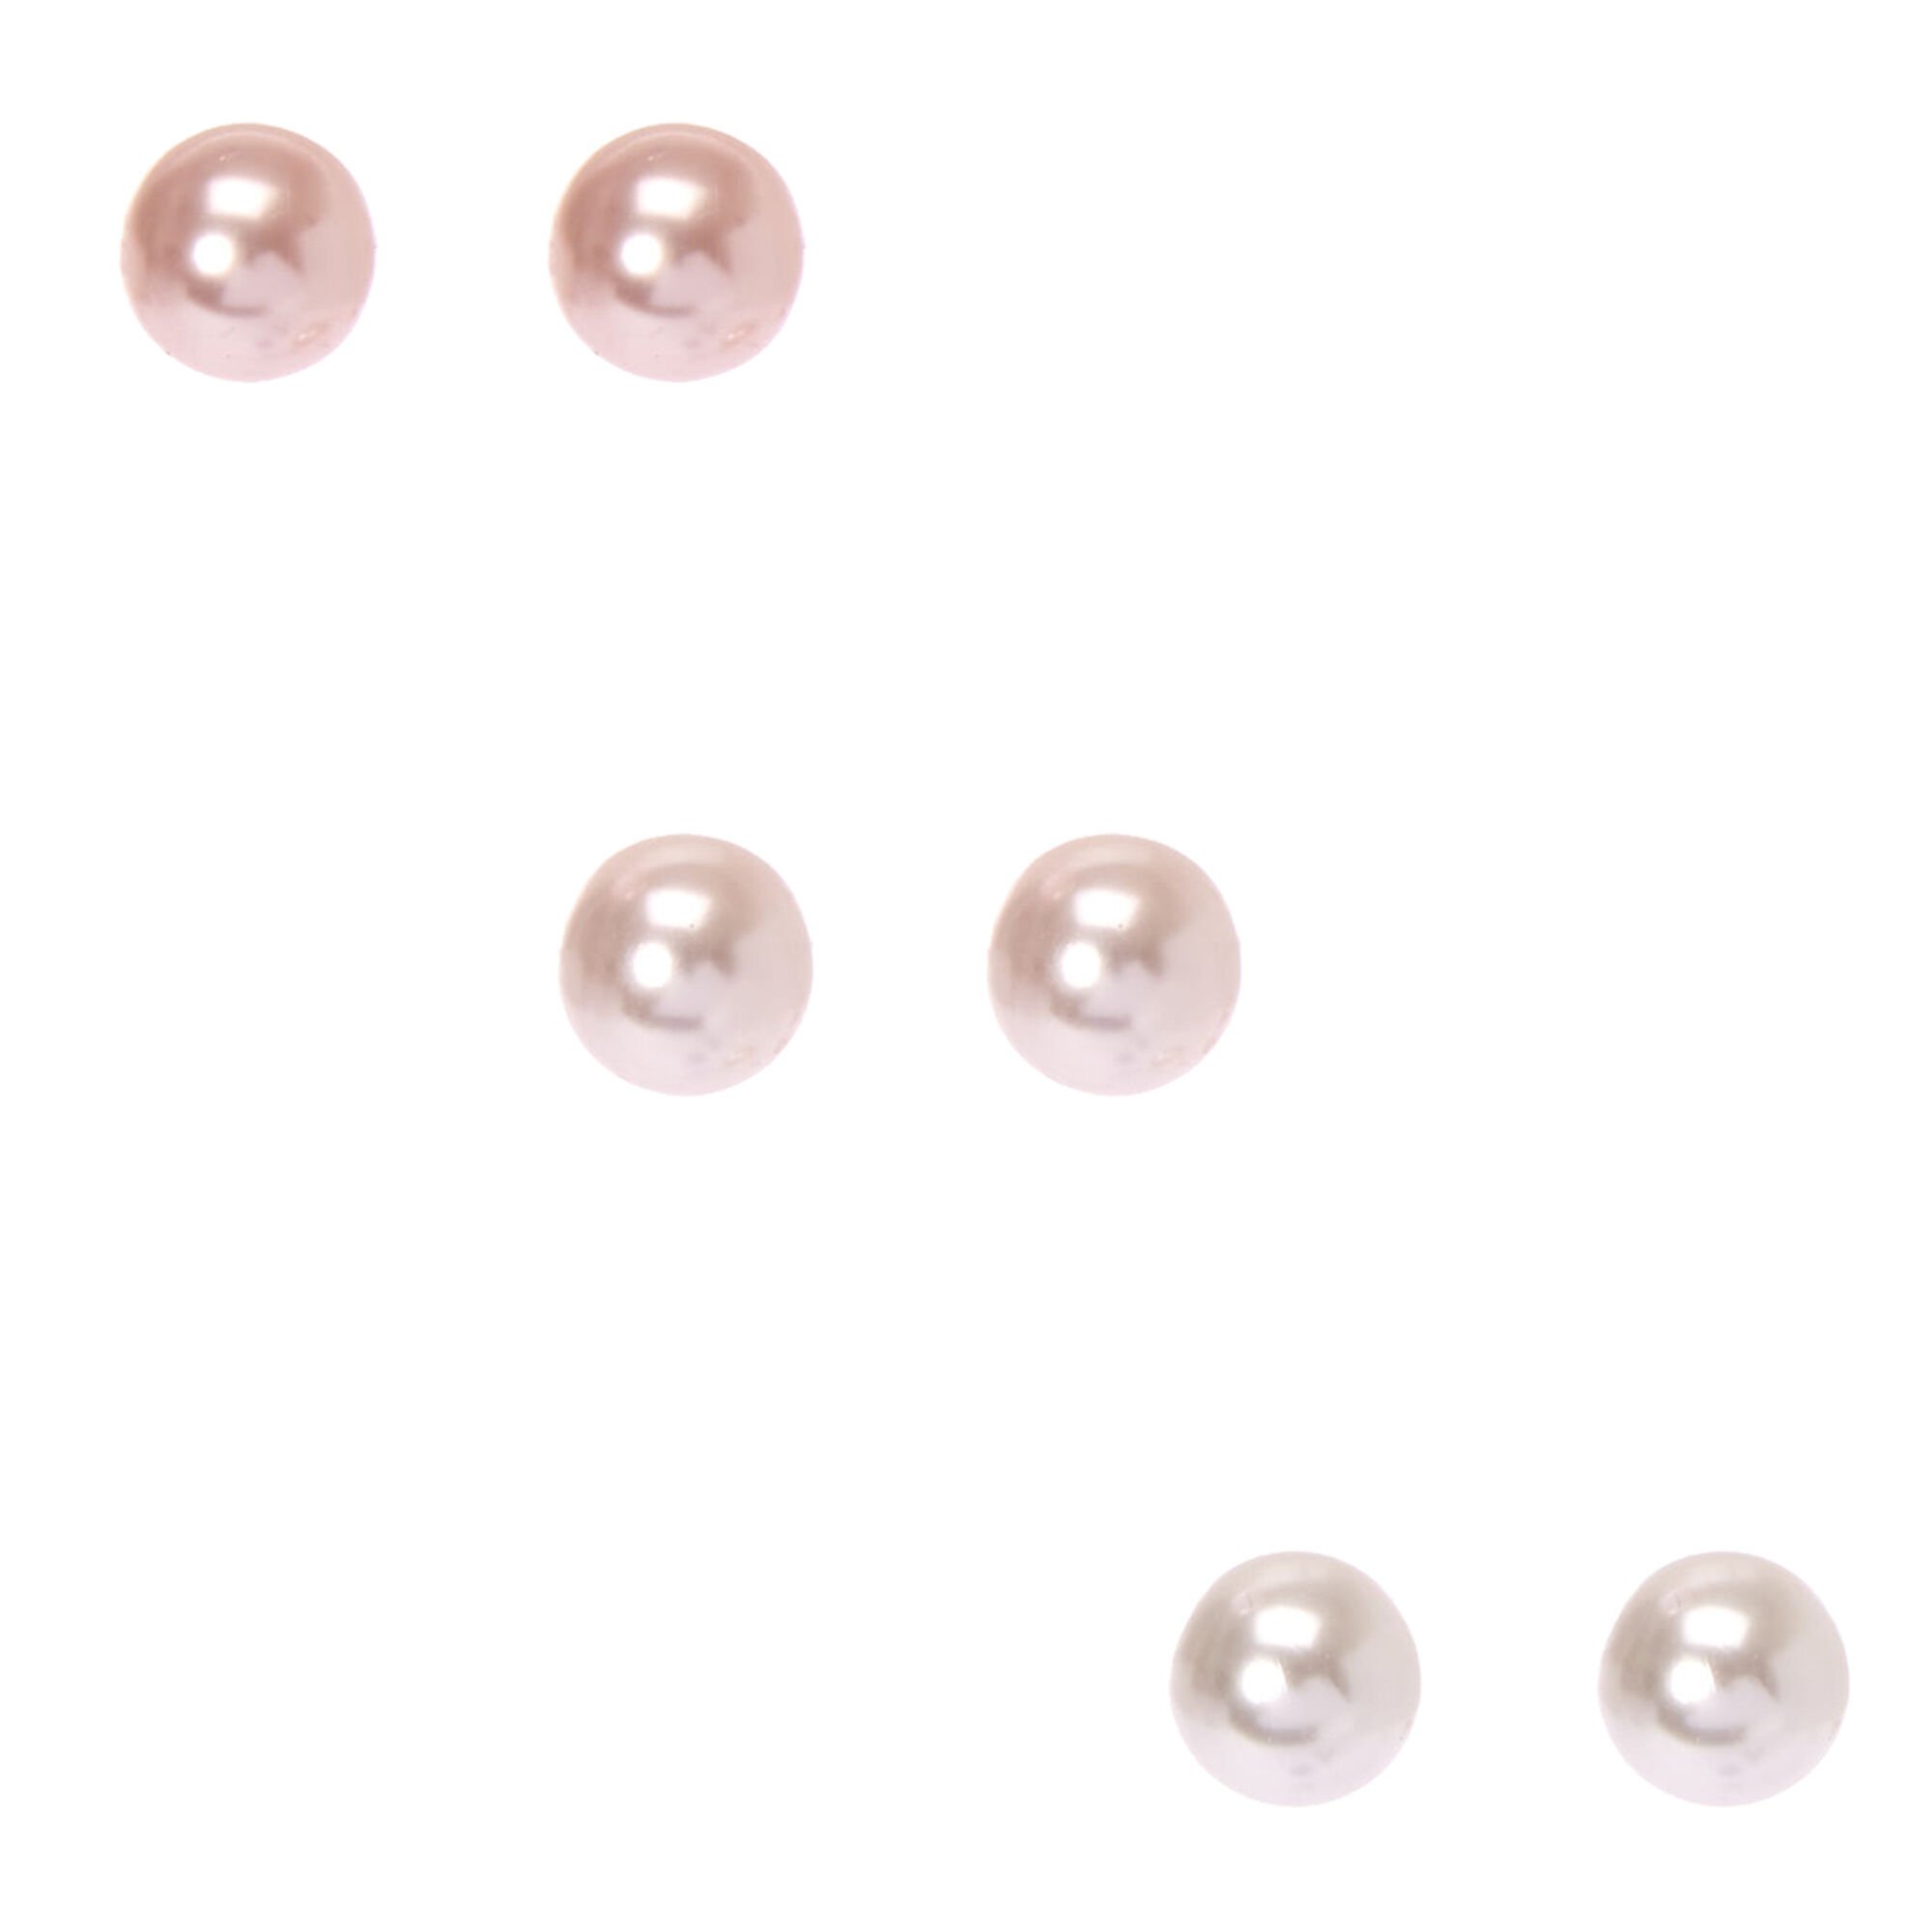 View Claires SilverTone 10MM Ombre Pearl Stud Earrings 3 Pack Pink information